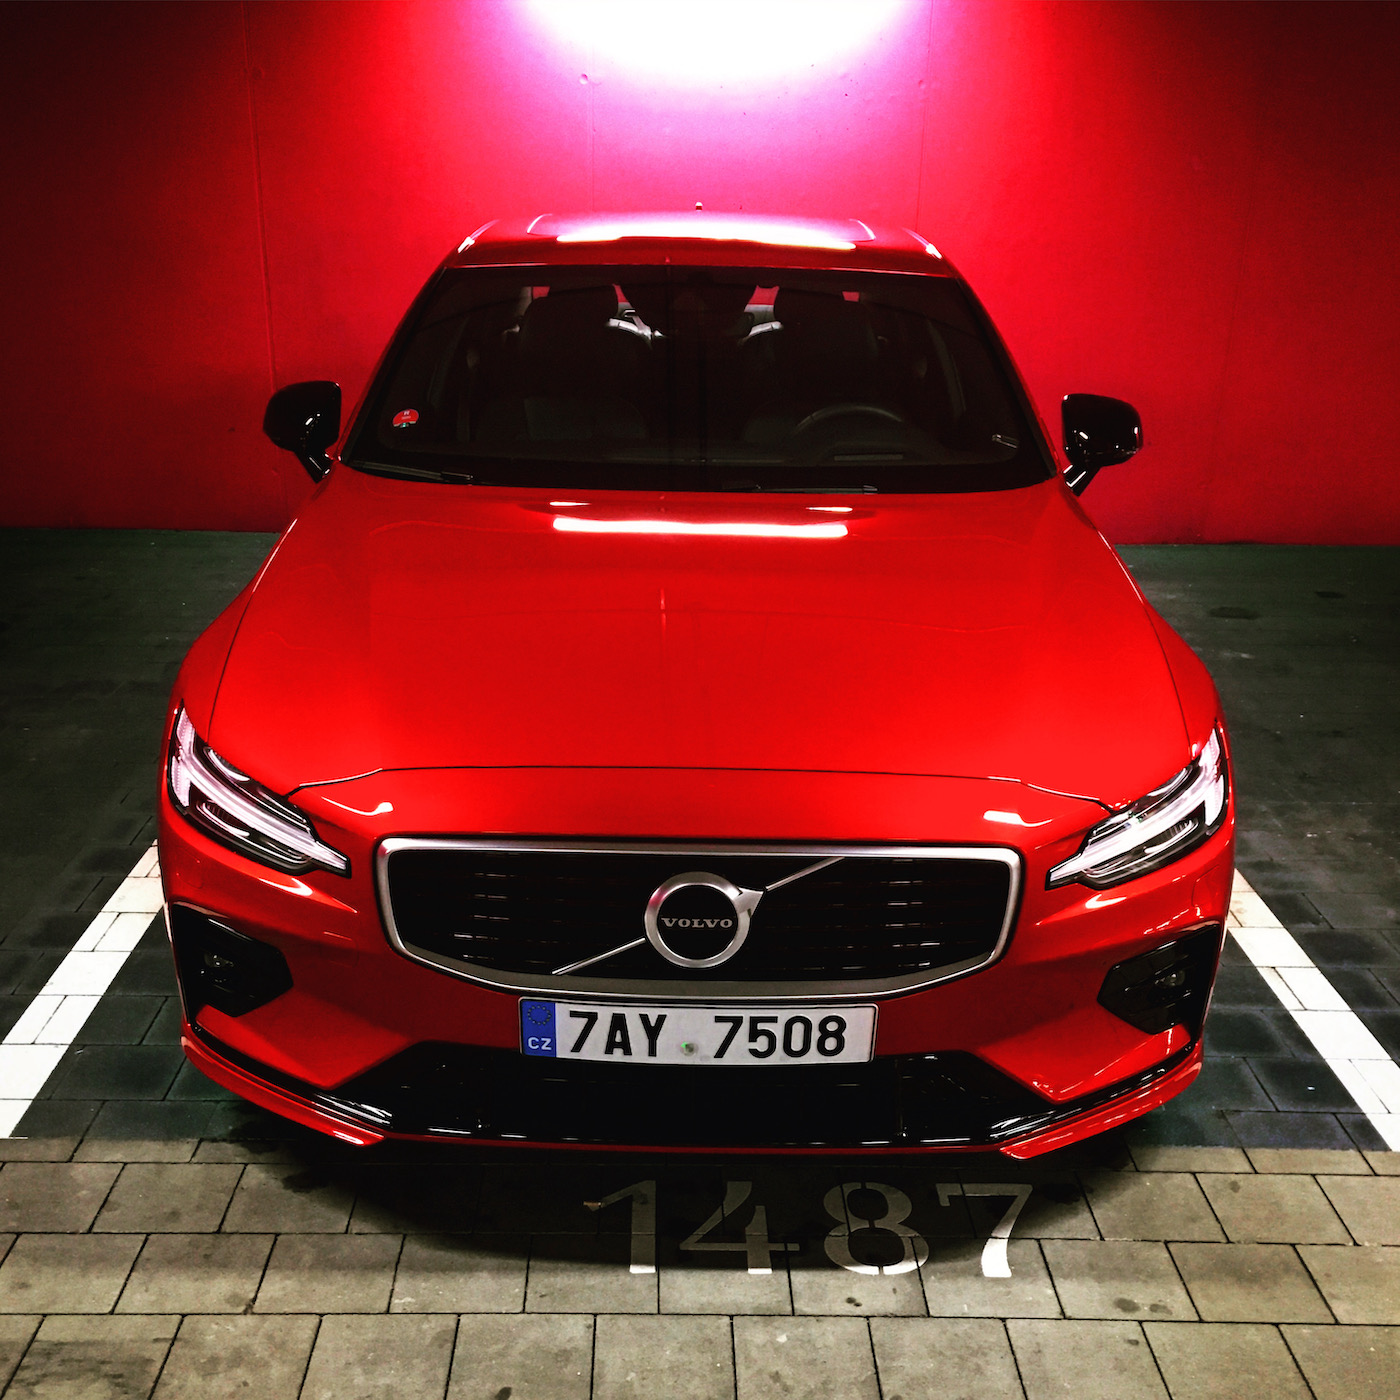 Red Volvo in the Red Garage 